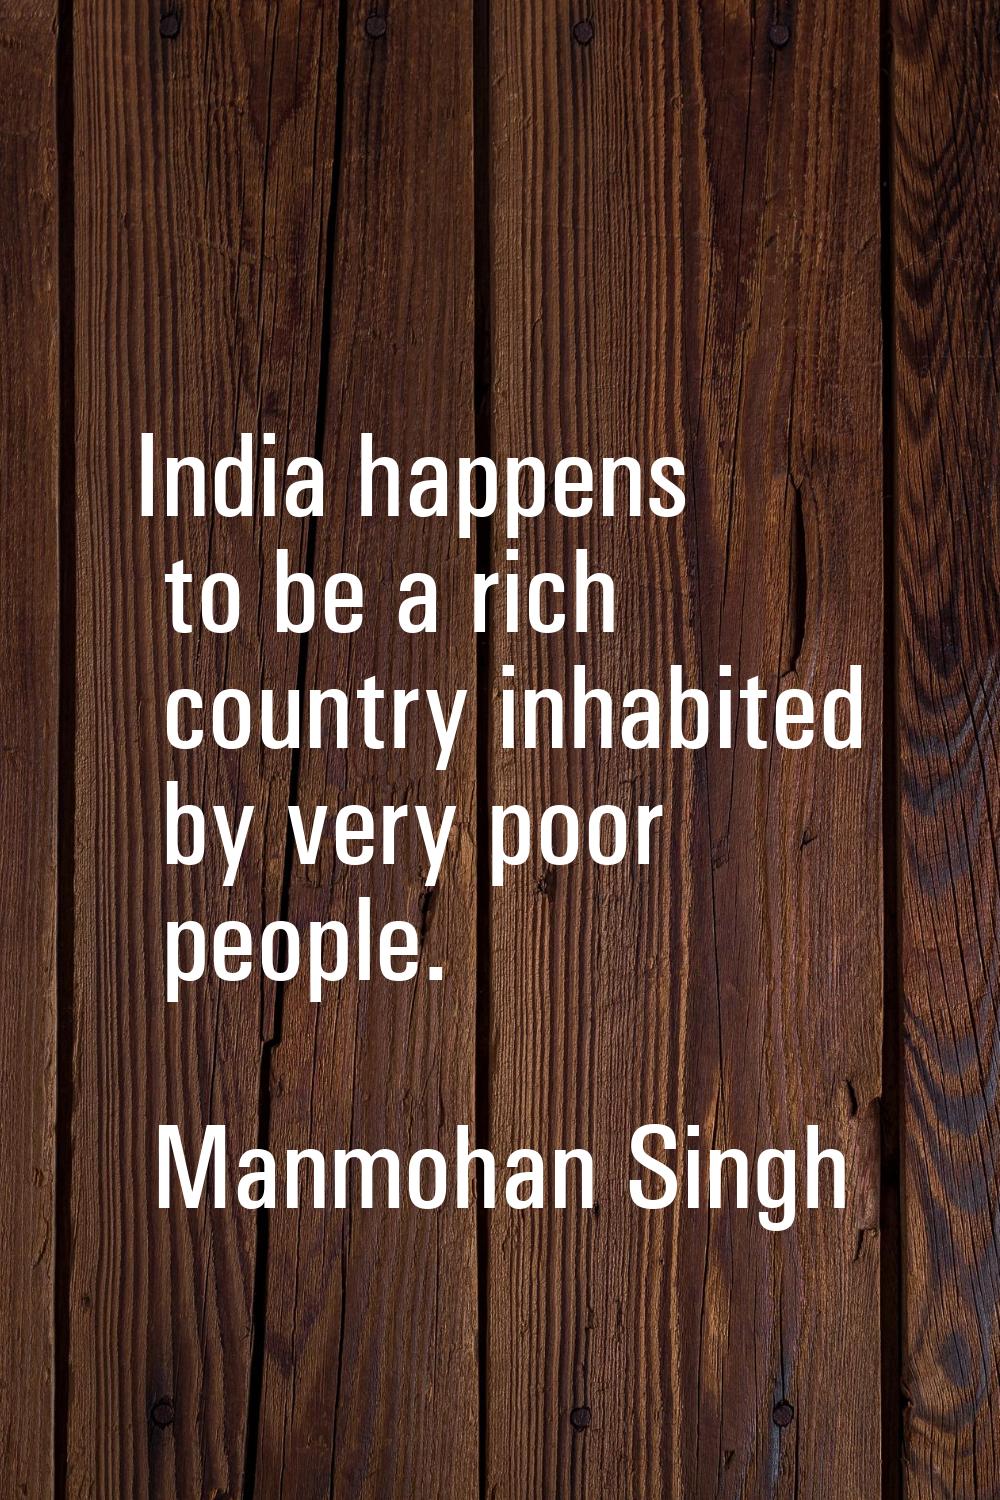 India happens to be a rich country inhabited by very poor people.